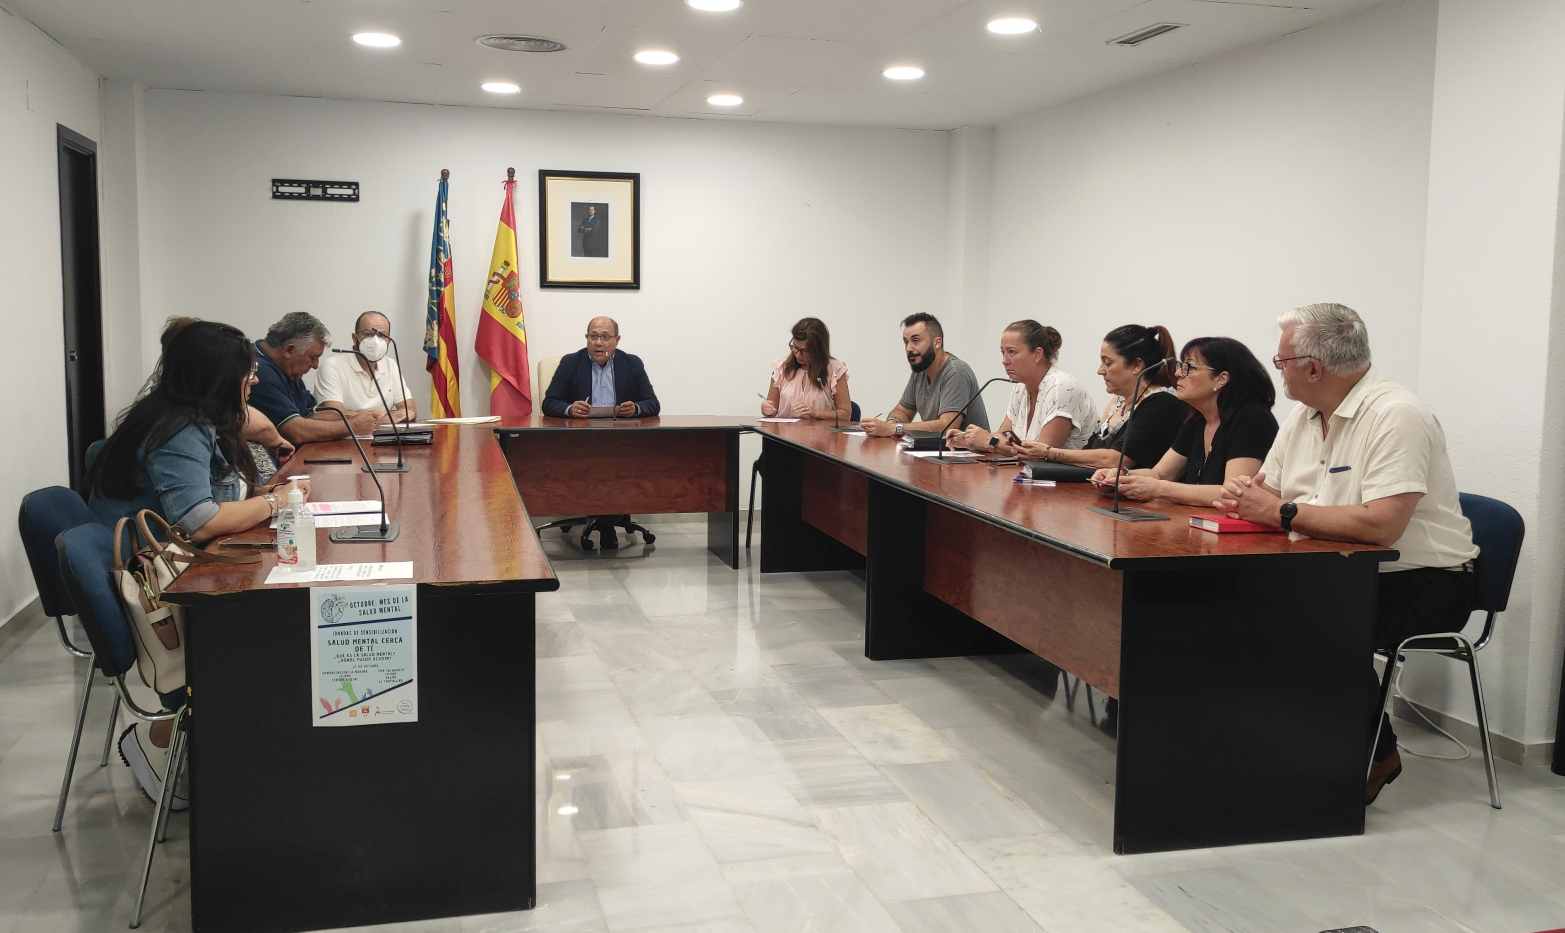 San Fulgencio Town Council approves its first Municipal Youth Plan for the period 2022-2025